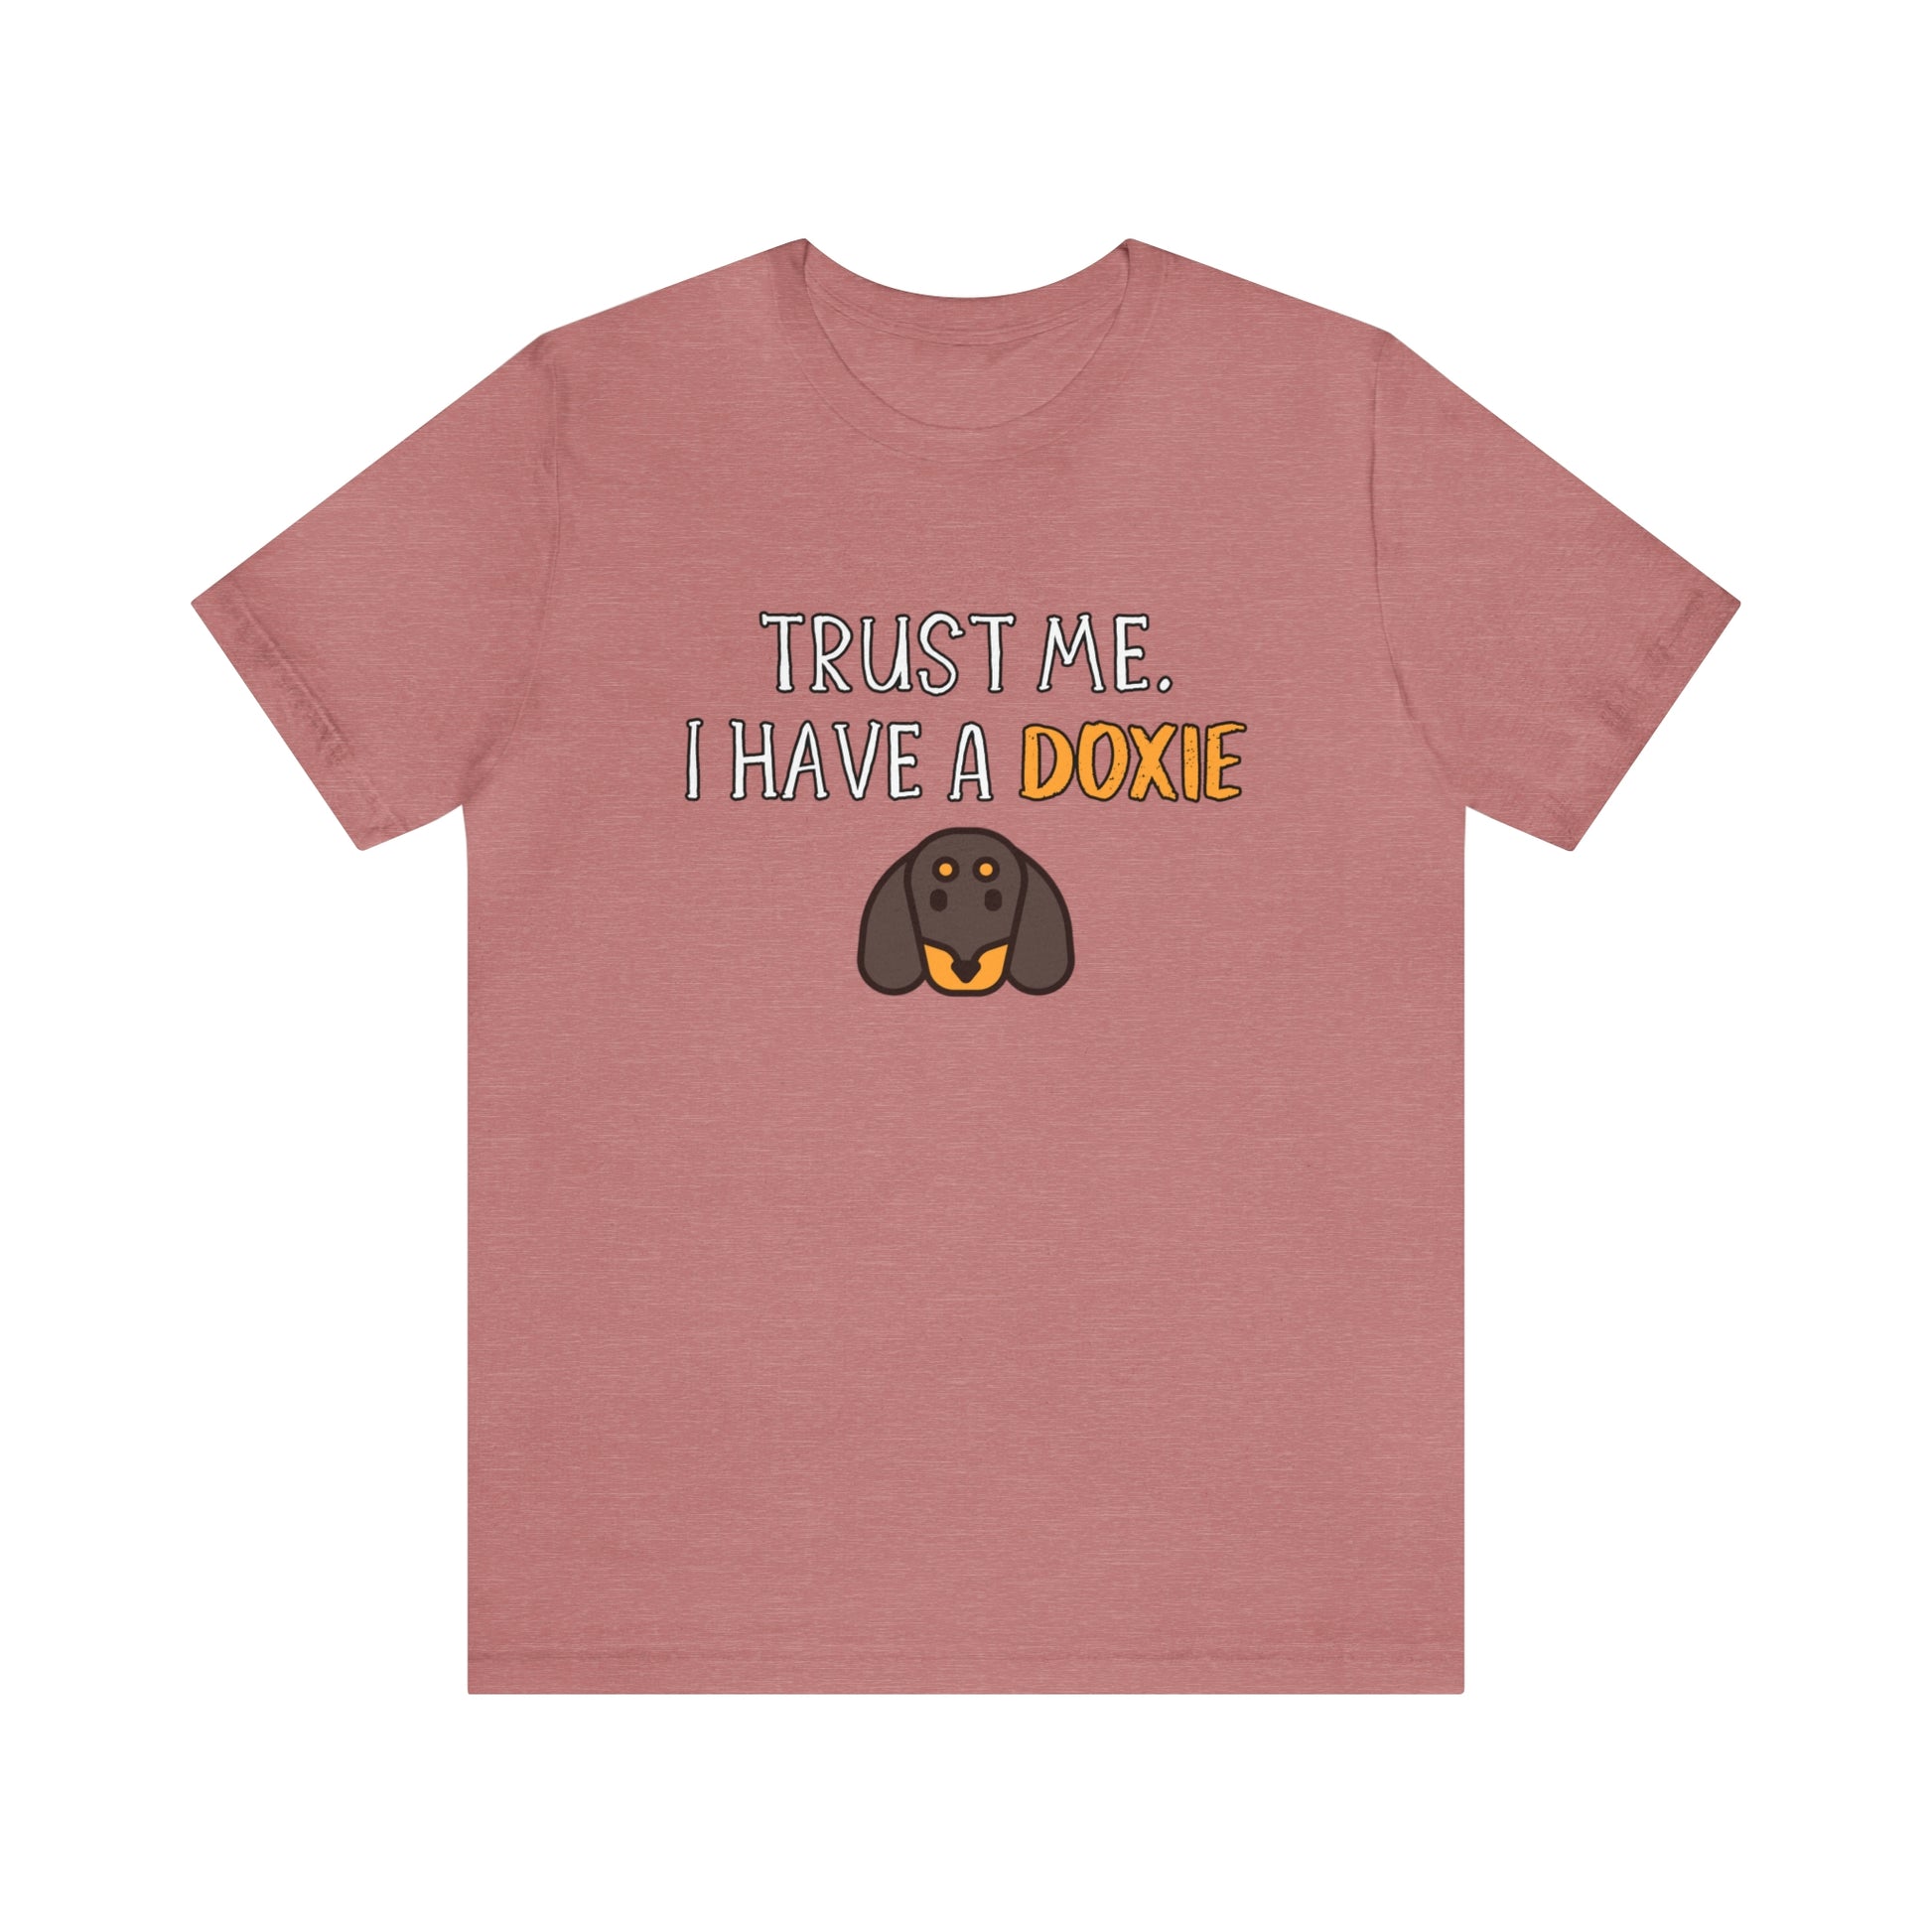 doxie t shirt pink